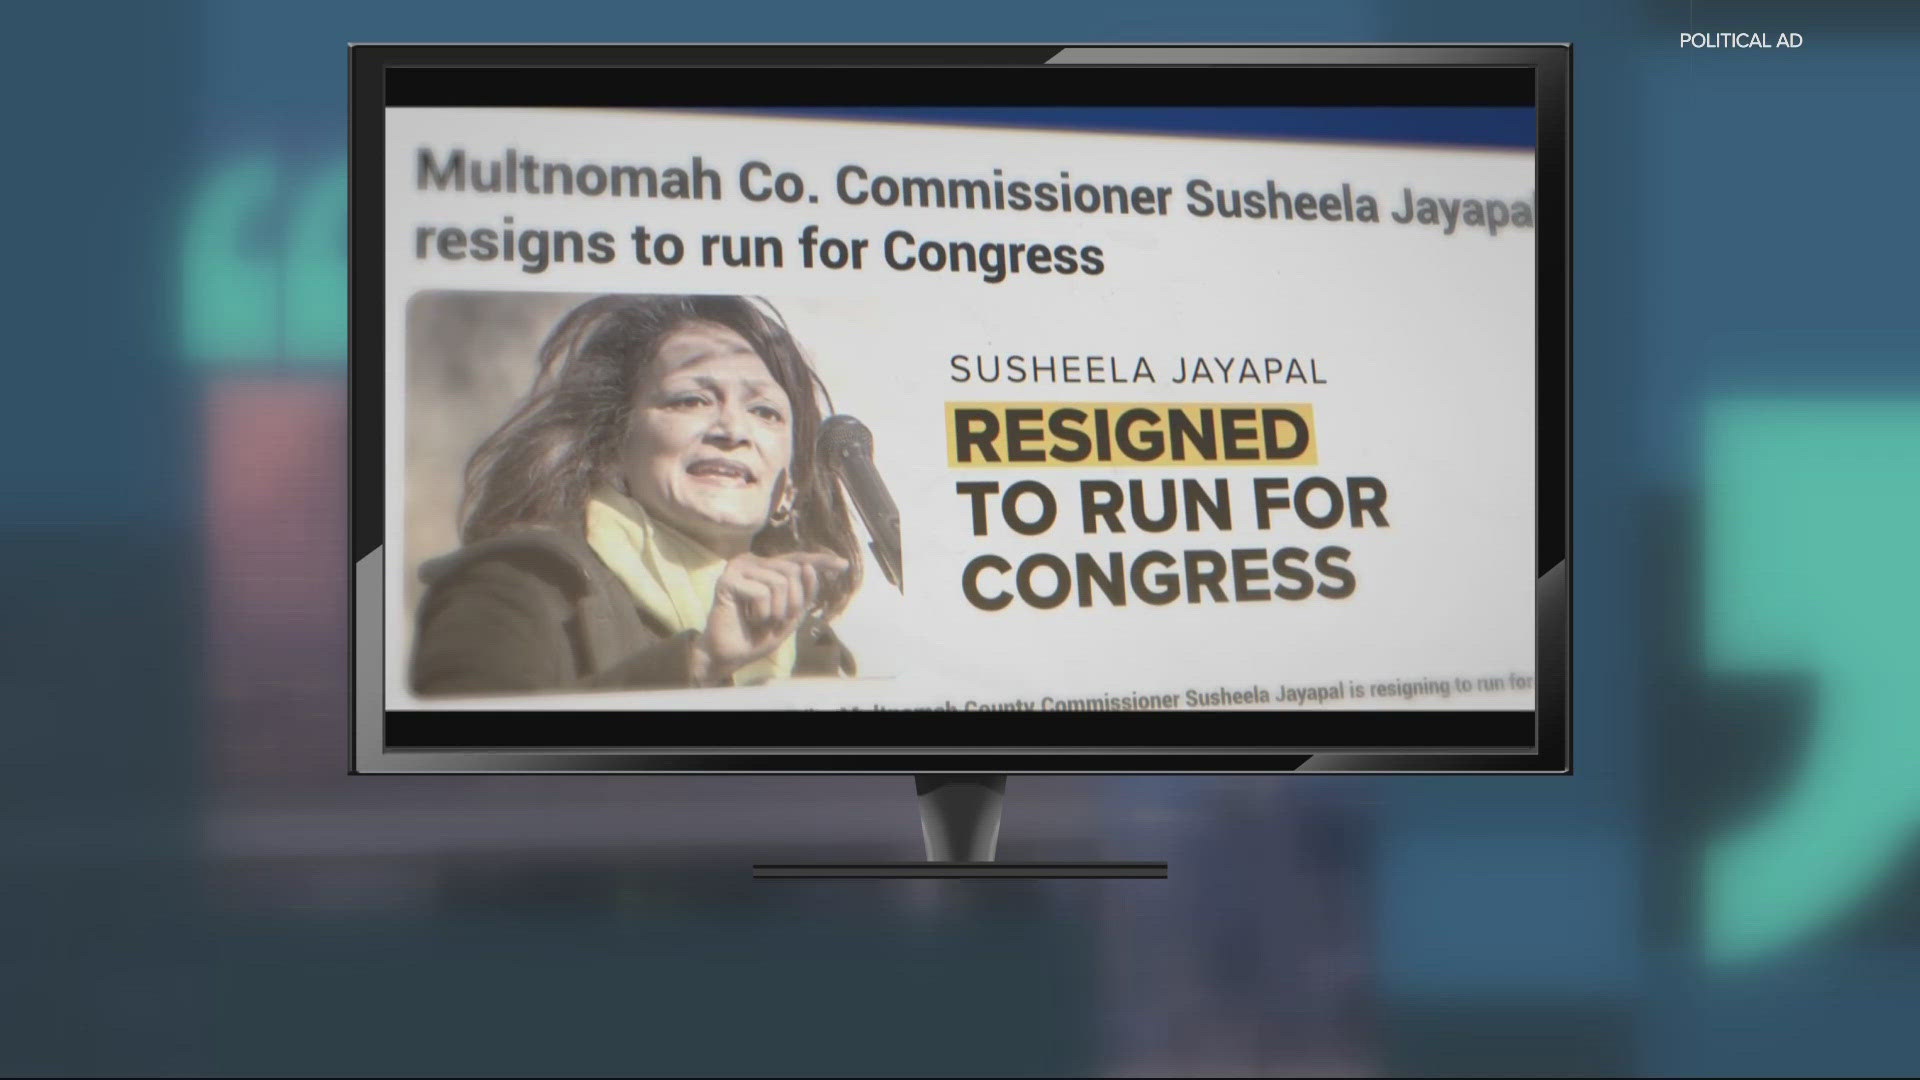 The California-based Super PAC "Voters for a Responsive Government" has been bankrolling ads attacking Jayapal in the 3rd Congressional District race.